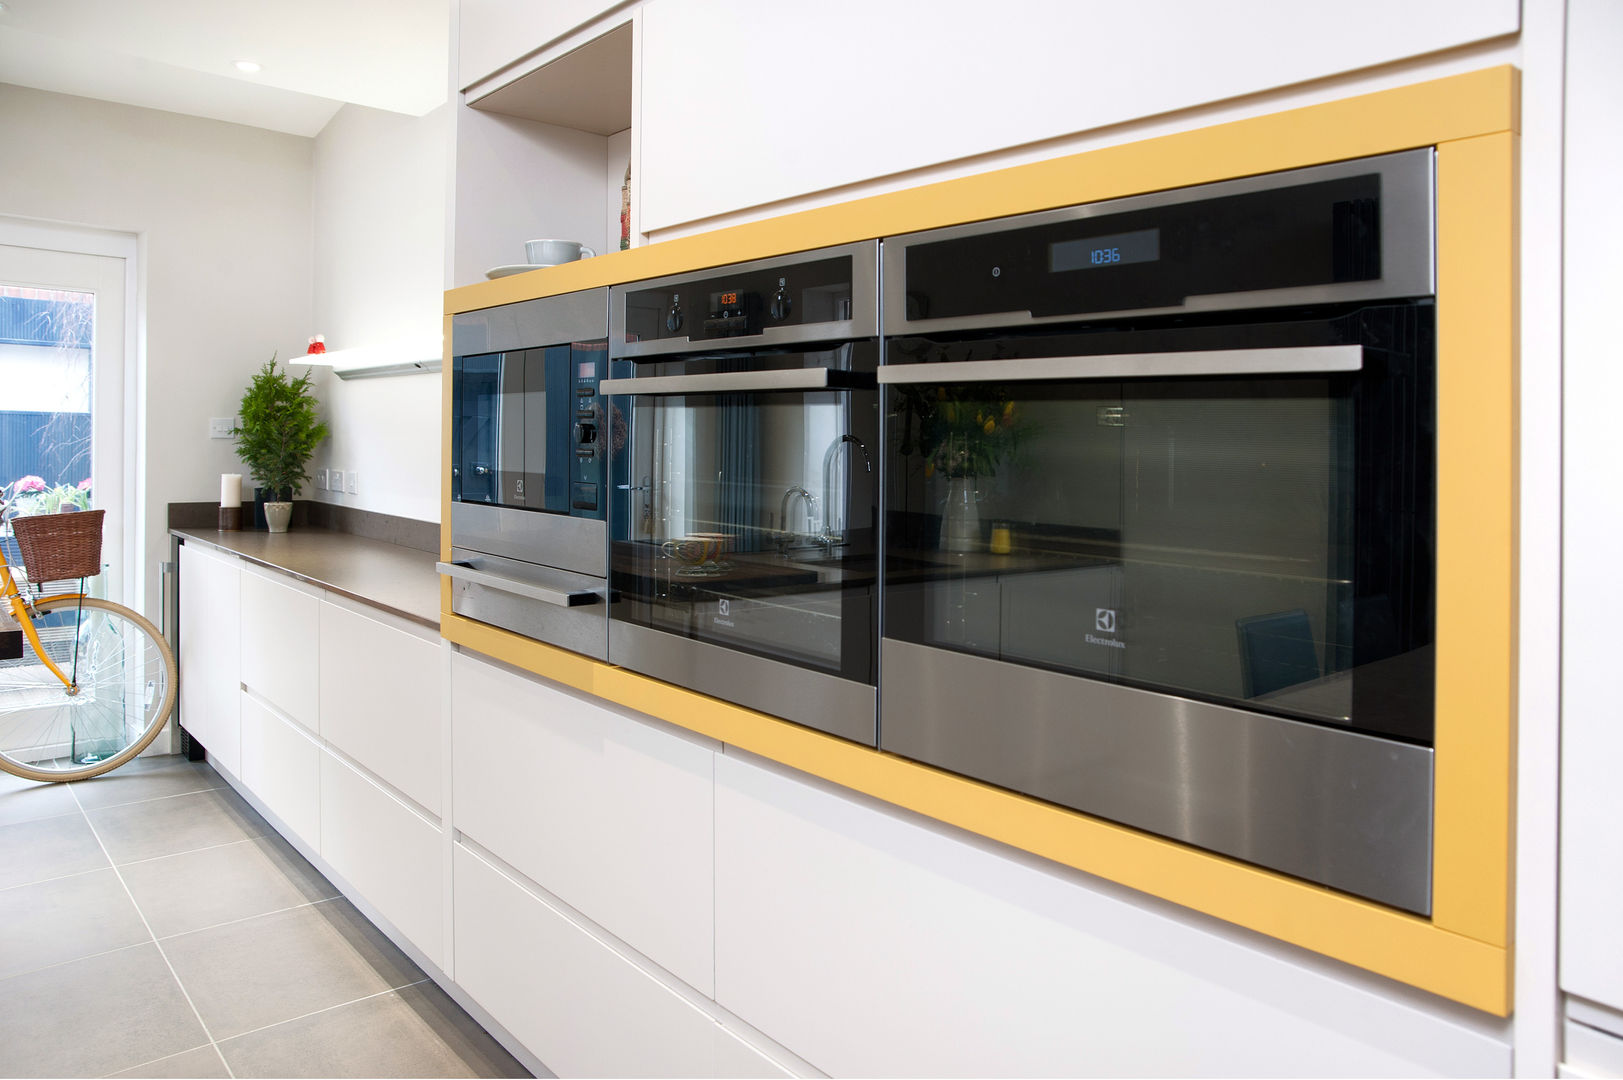 Electrolux appliances wrapped in Curry Yellow panelling Haus12 Interiors Cucina moderna